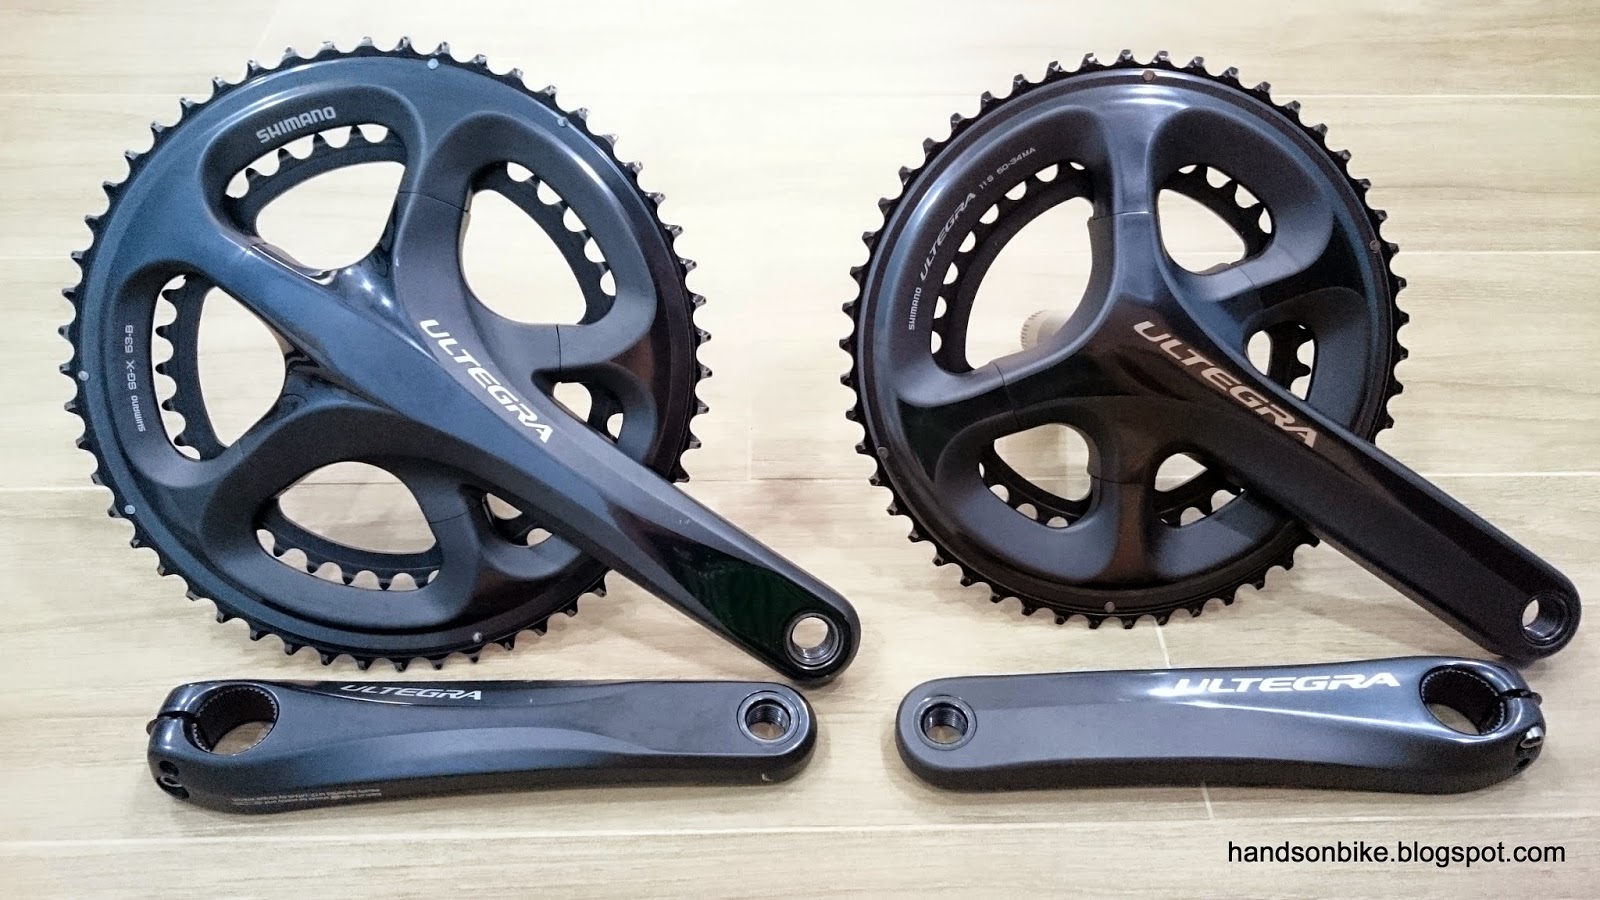 Hands On Bike: Difference between 6800 and Crankset